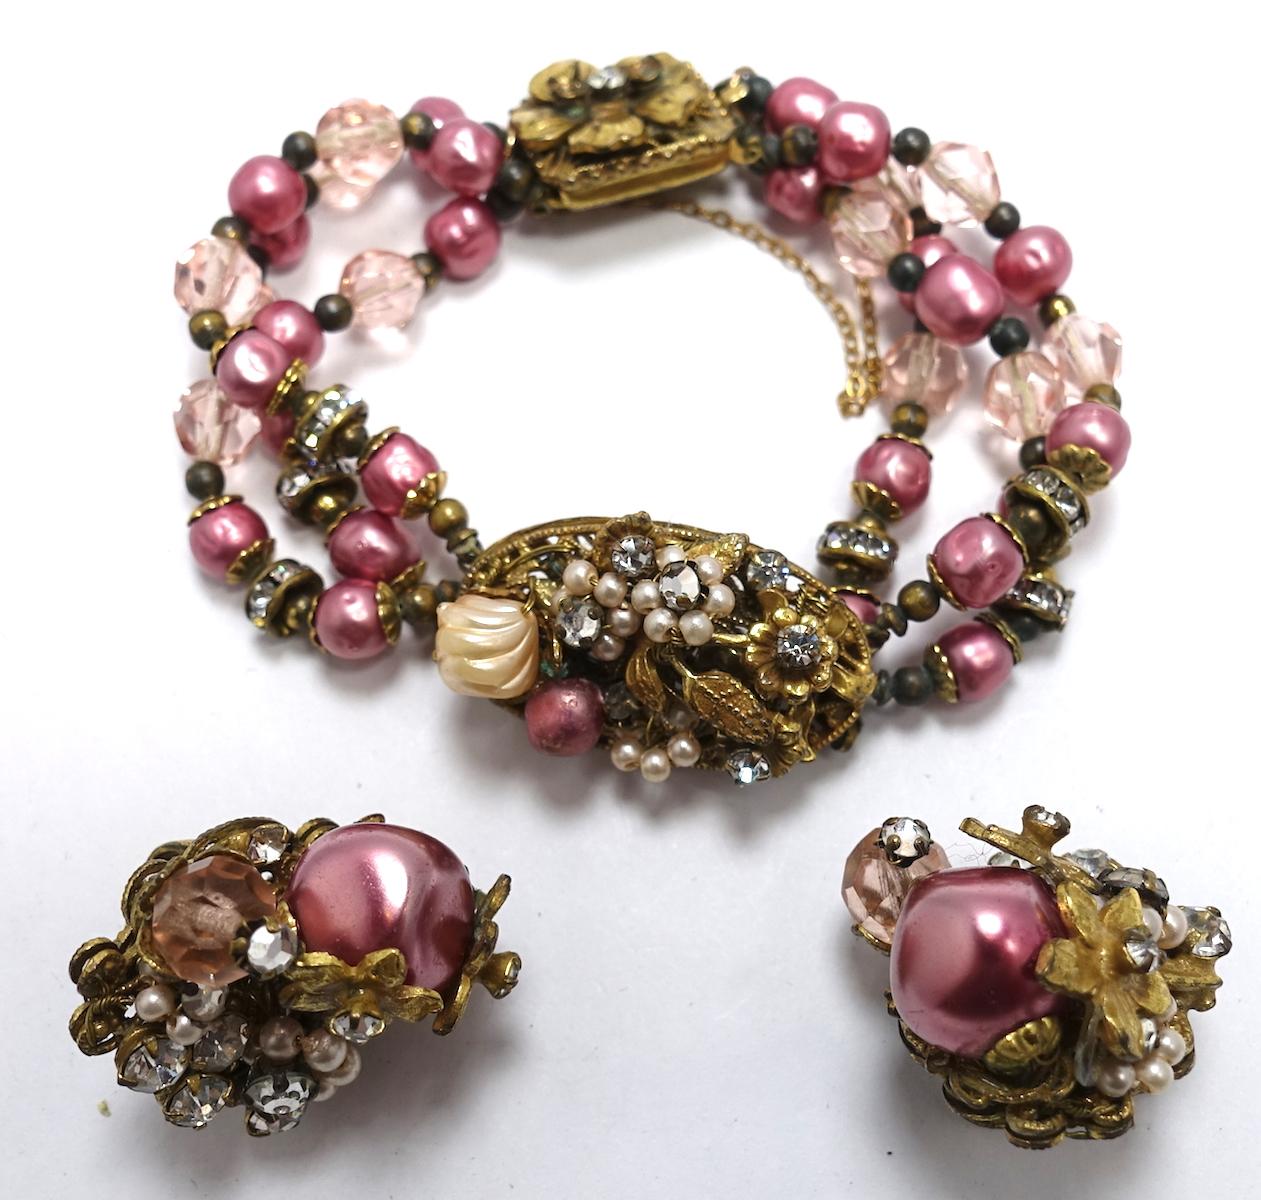 Although this set is not signed, it has all the attributes of “Original by Robert”. The bracelet has a pink stones with clear crystal accents in a gold tone filigree setting. The bracelet measures 7” x 3/4” with a slide in clasp with a safety chain.